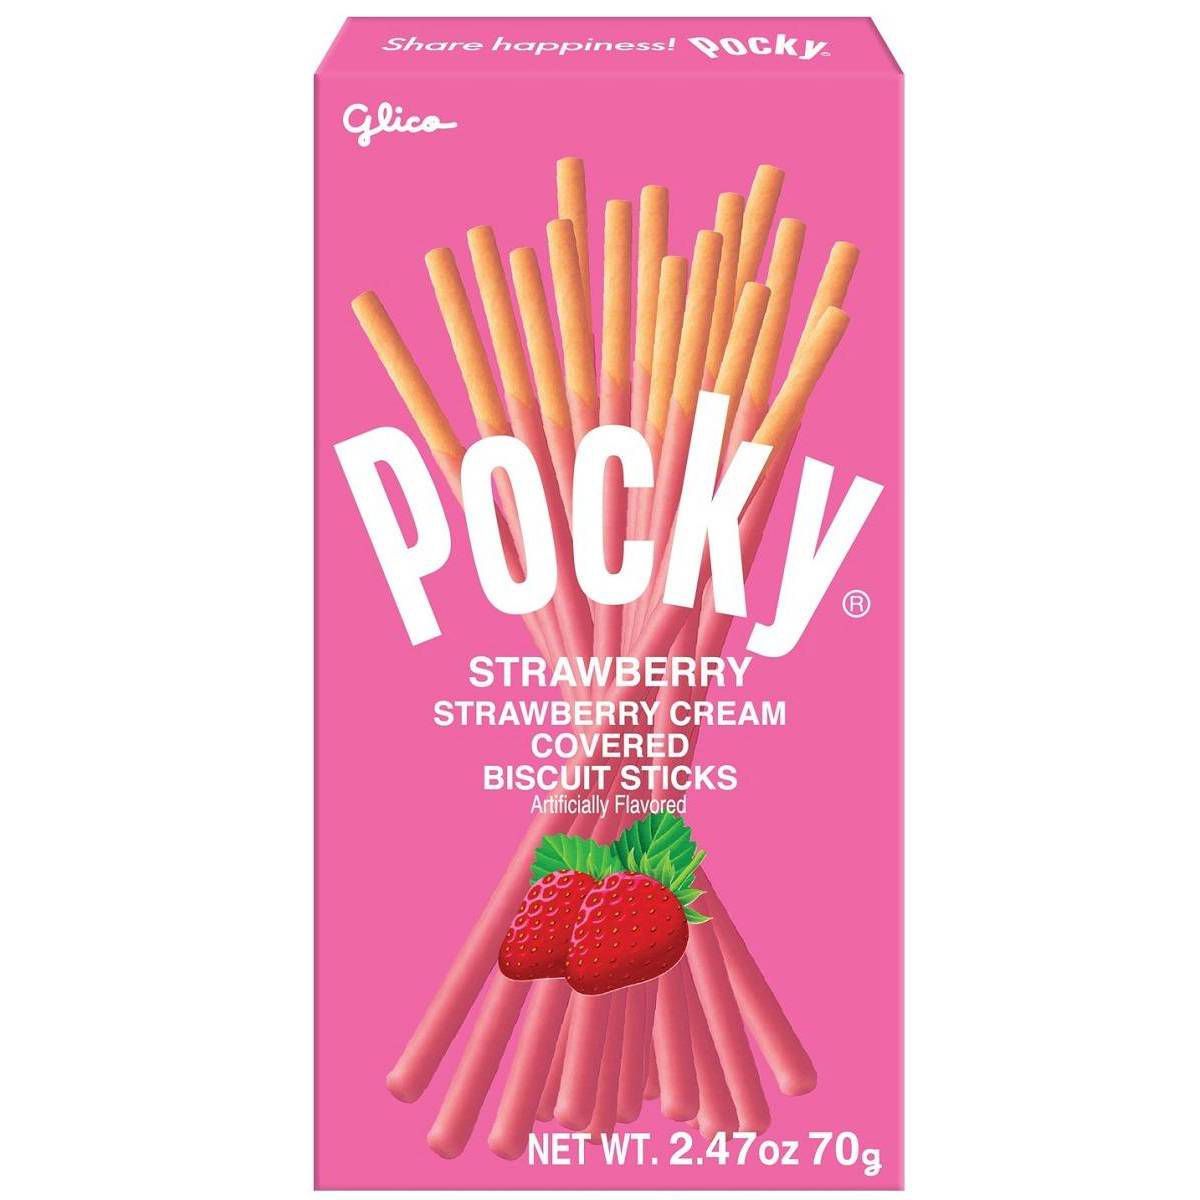 Glico Pocky Strawberry Cream Covered Biscuit Sticks | Target